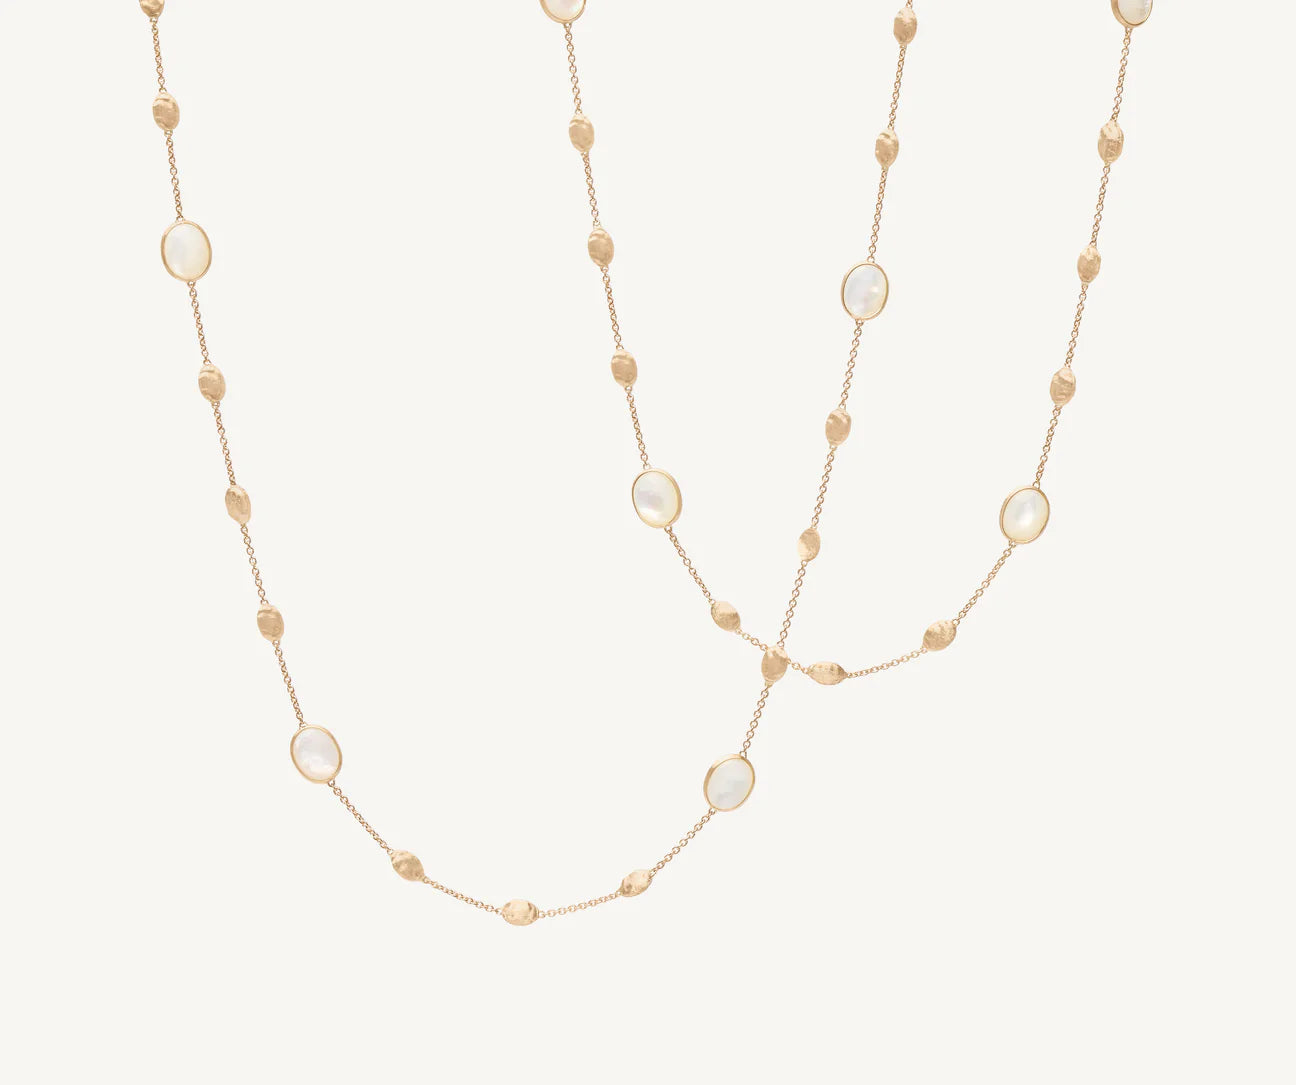 Marco Bicego Siviglia 18k Gold Necklace with Mother of Pearl Long - Orsini Jewellers